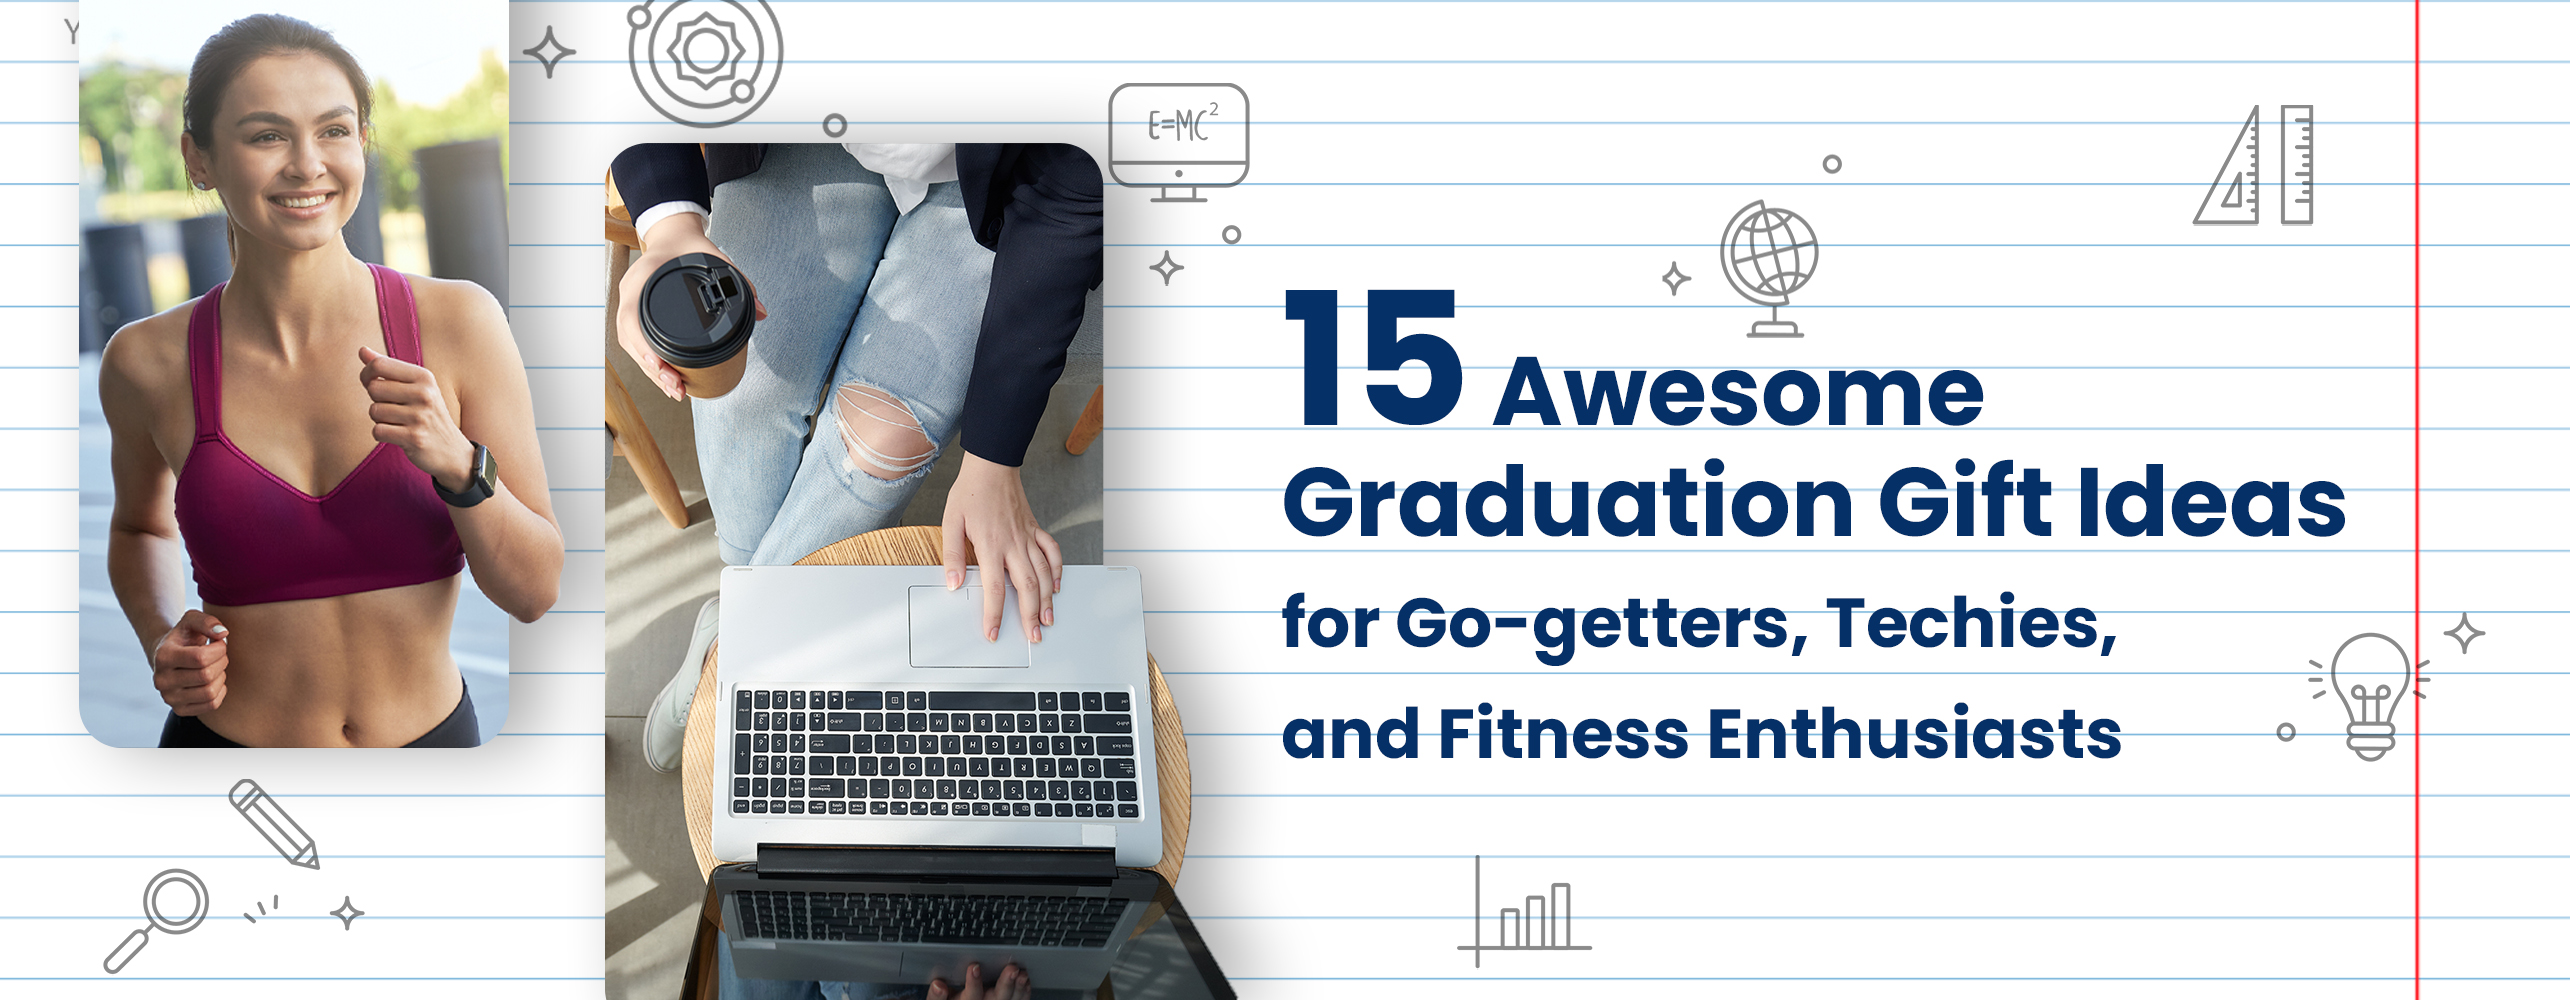 15 Awesome Graduation Gift Ideas for Go-getters, Techies, and Fitness Enthusiasts